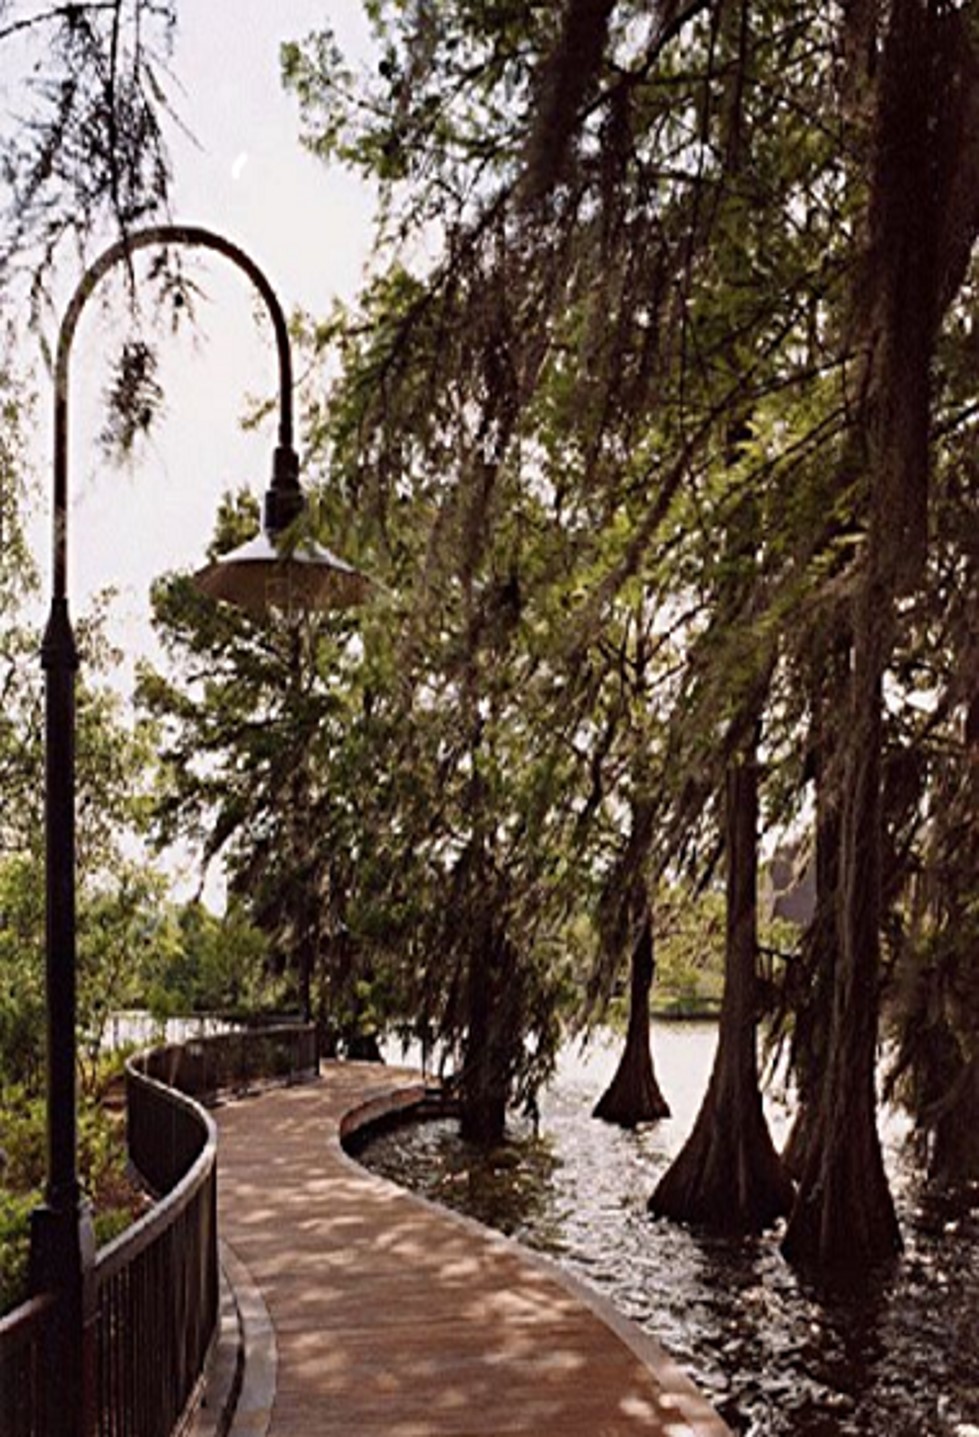 Stock photo provided as an  example of a boardwalk along Contraband Bayou